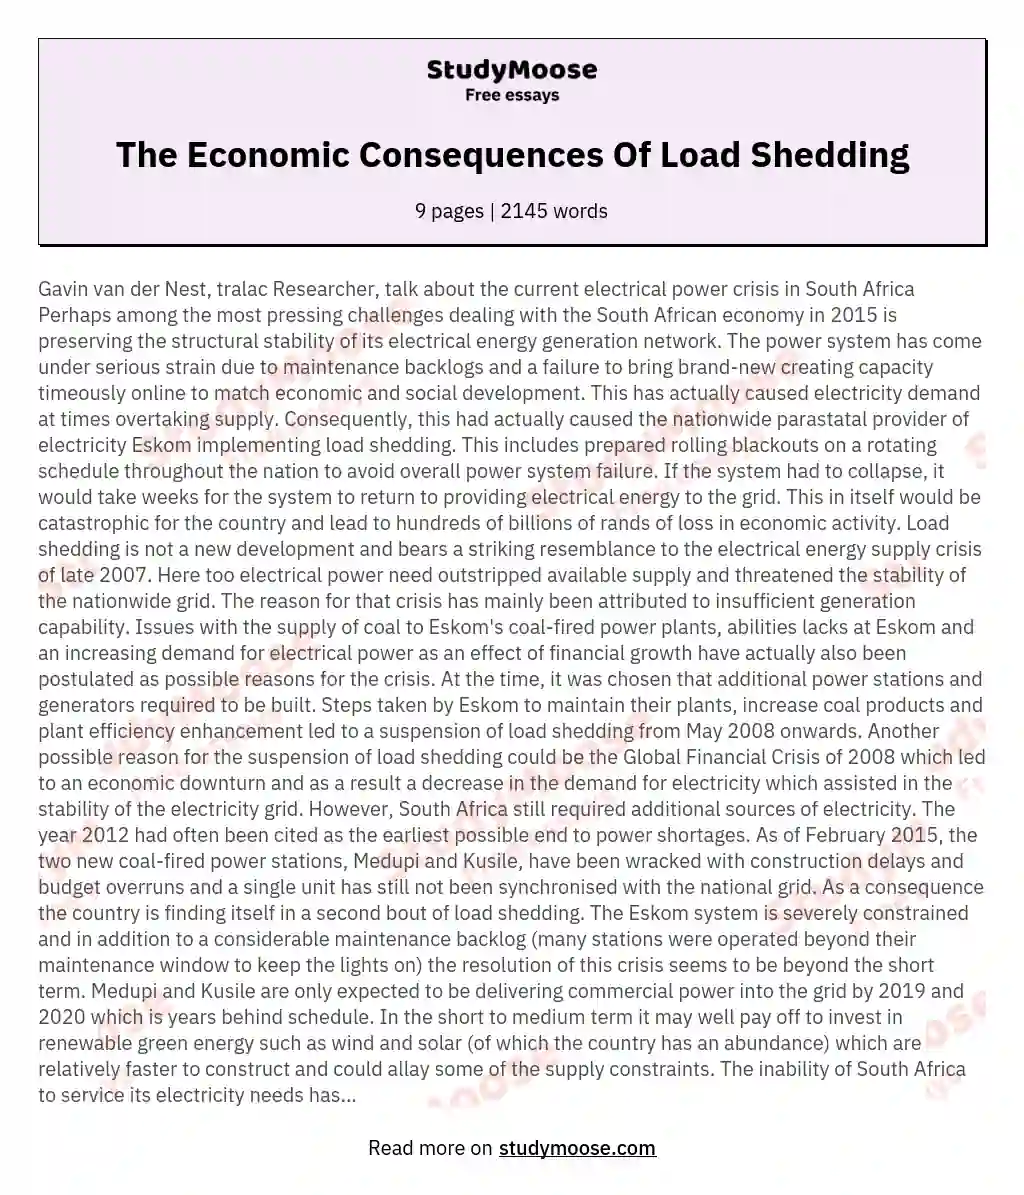 The Economic Consequences Of Load Shedding essay